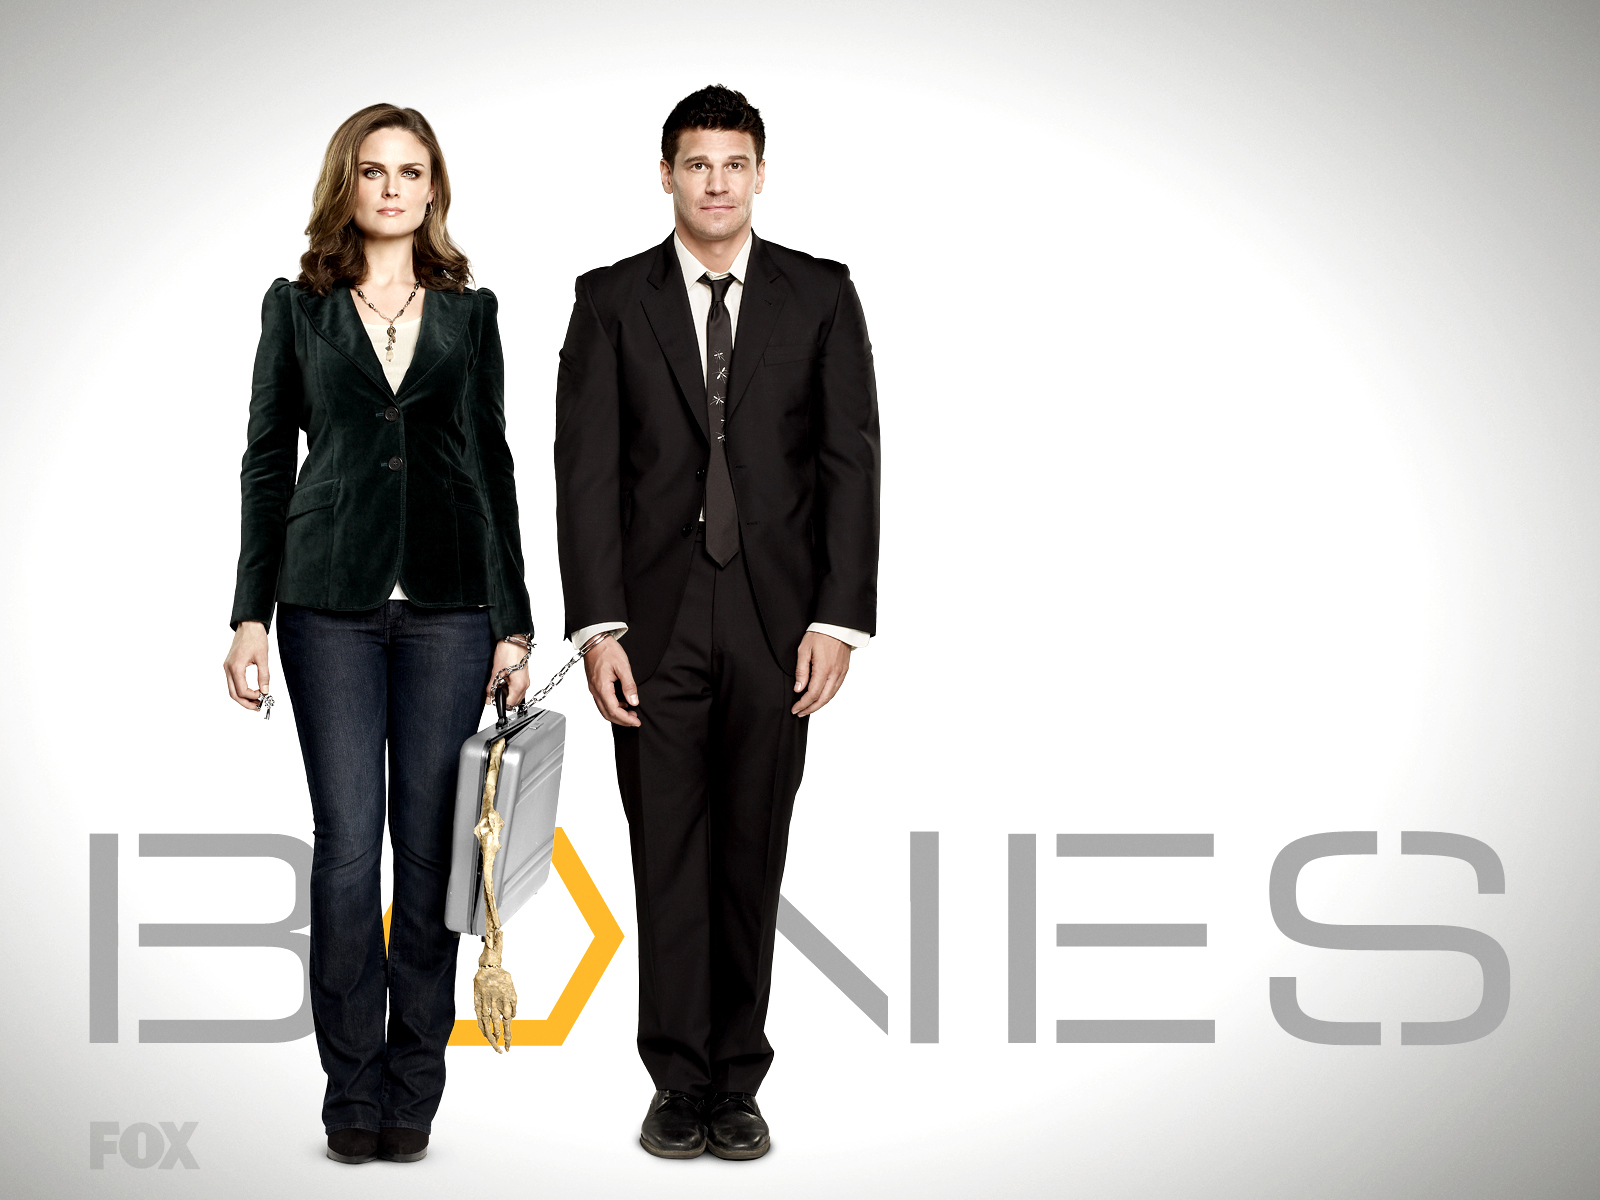 Download Bones wallpapers for mobile phone free Bones HD pictures